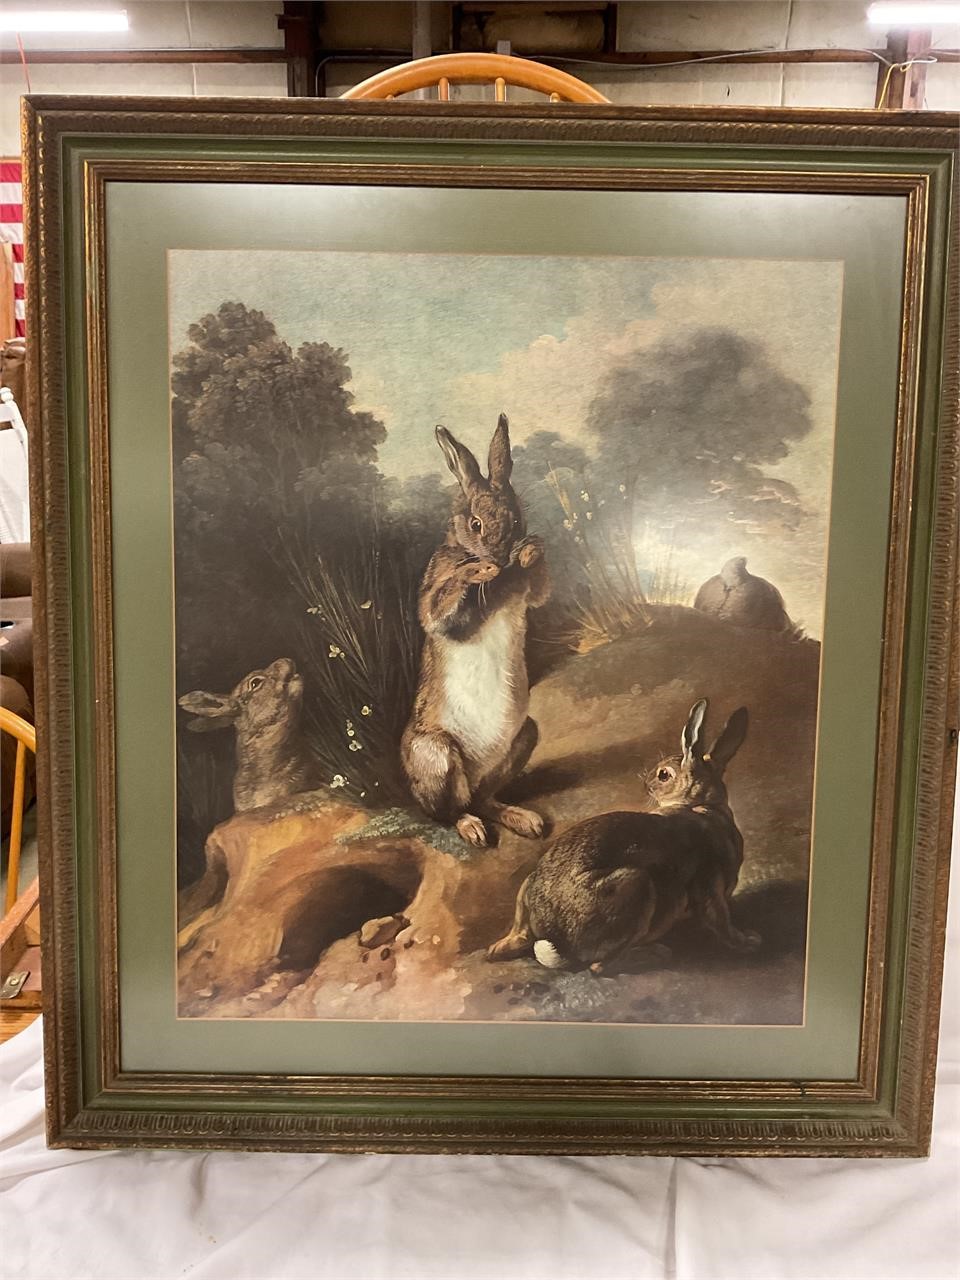 Framed Rabbit Picture 32”x28”